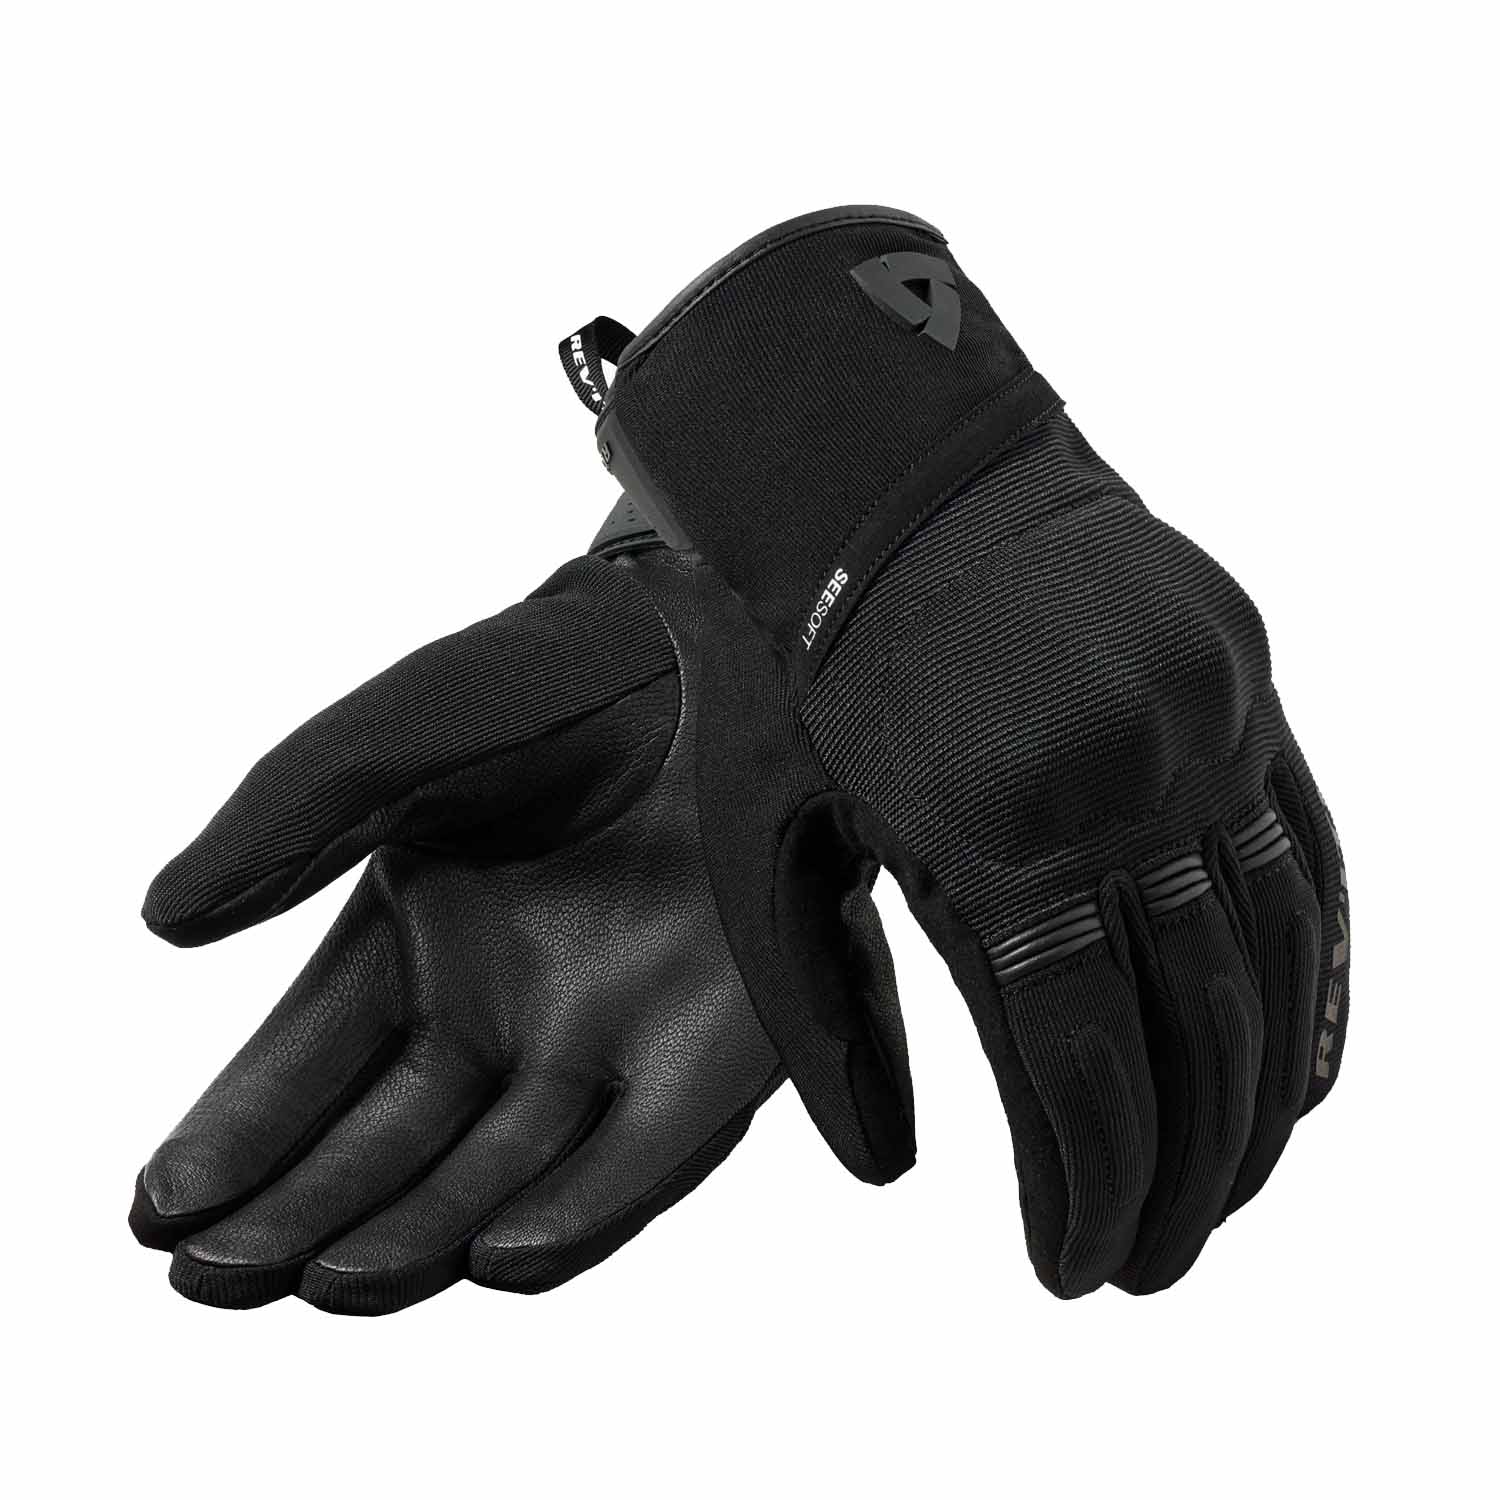 Image of REV'IT! Mosca 2 H2O Gloves Black Talla S